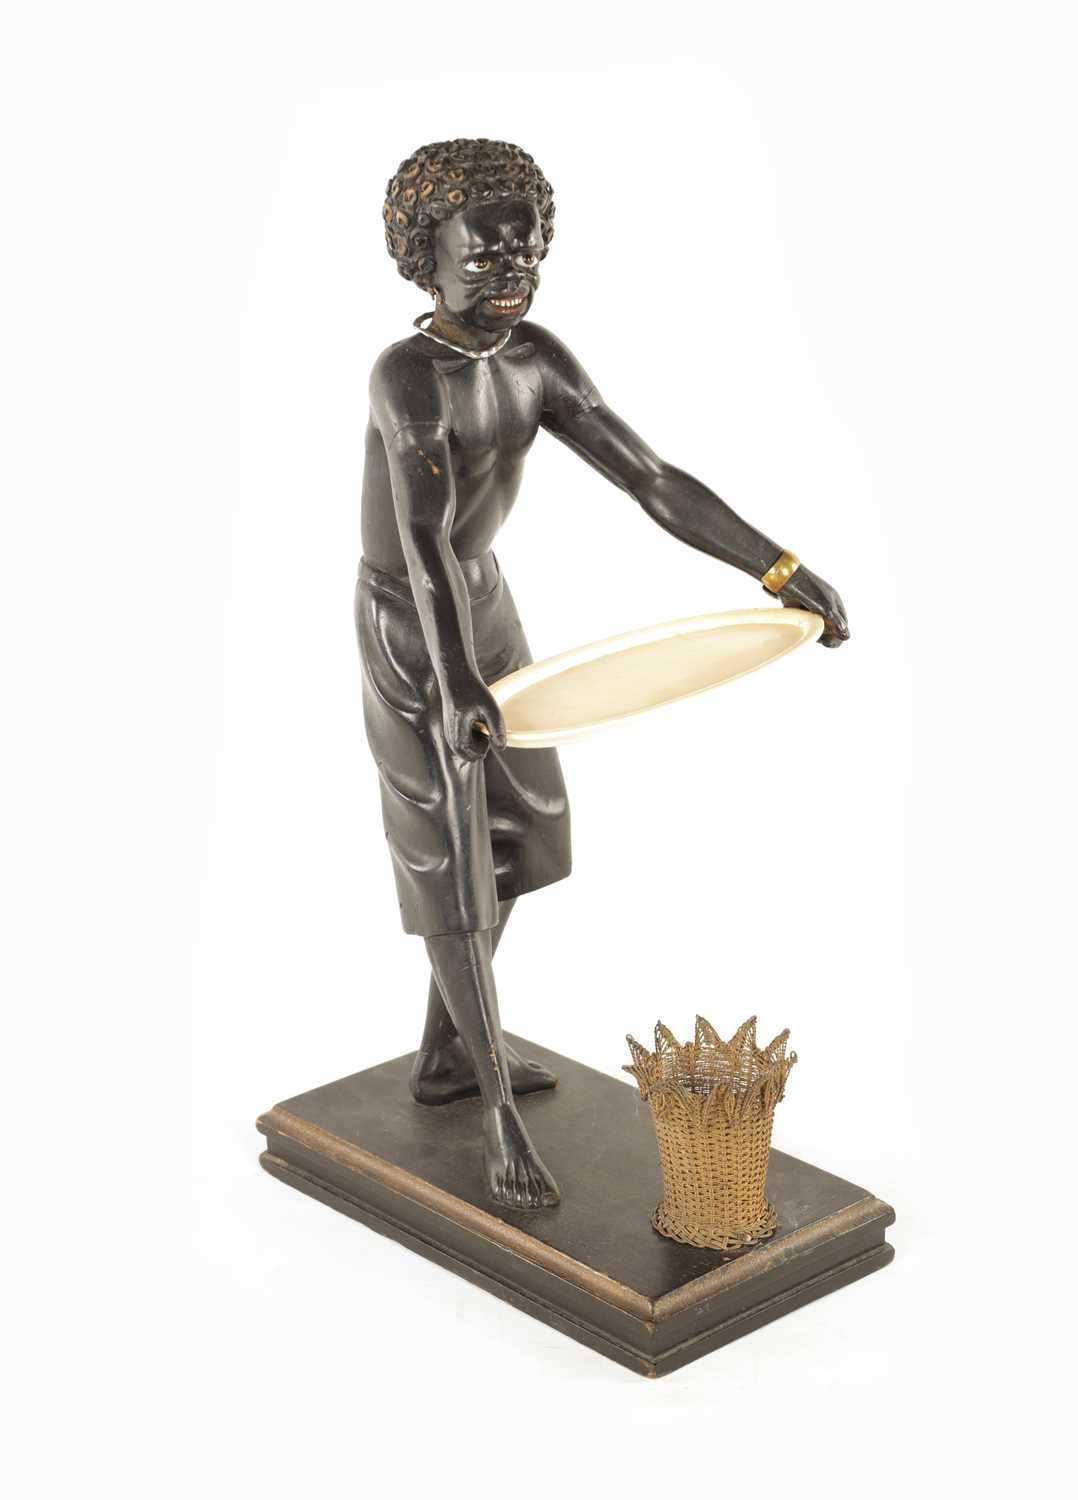 A 19TH CENTURY CARVED WOOD AND IVORY BLACKAMOOR “CARD” FIGURE